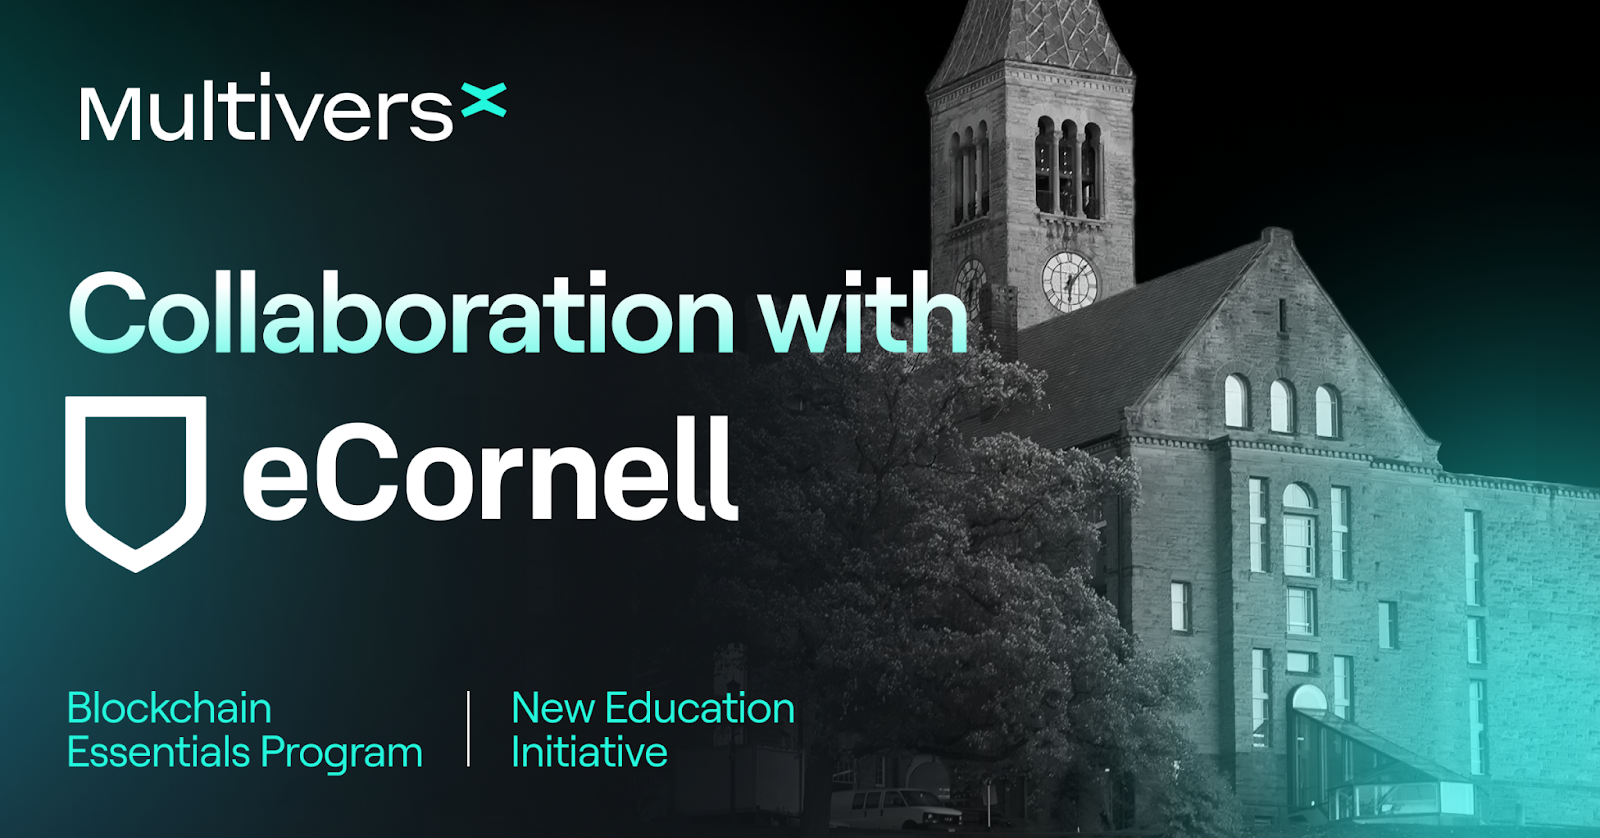 MultiversX Partners with eCornell University for a Blockchain Education Project